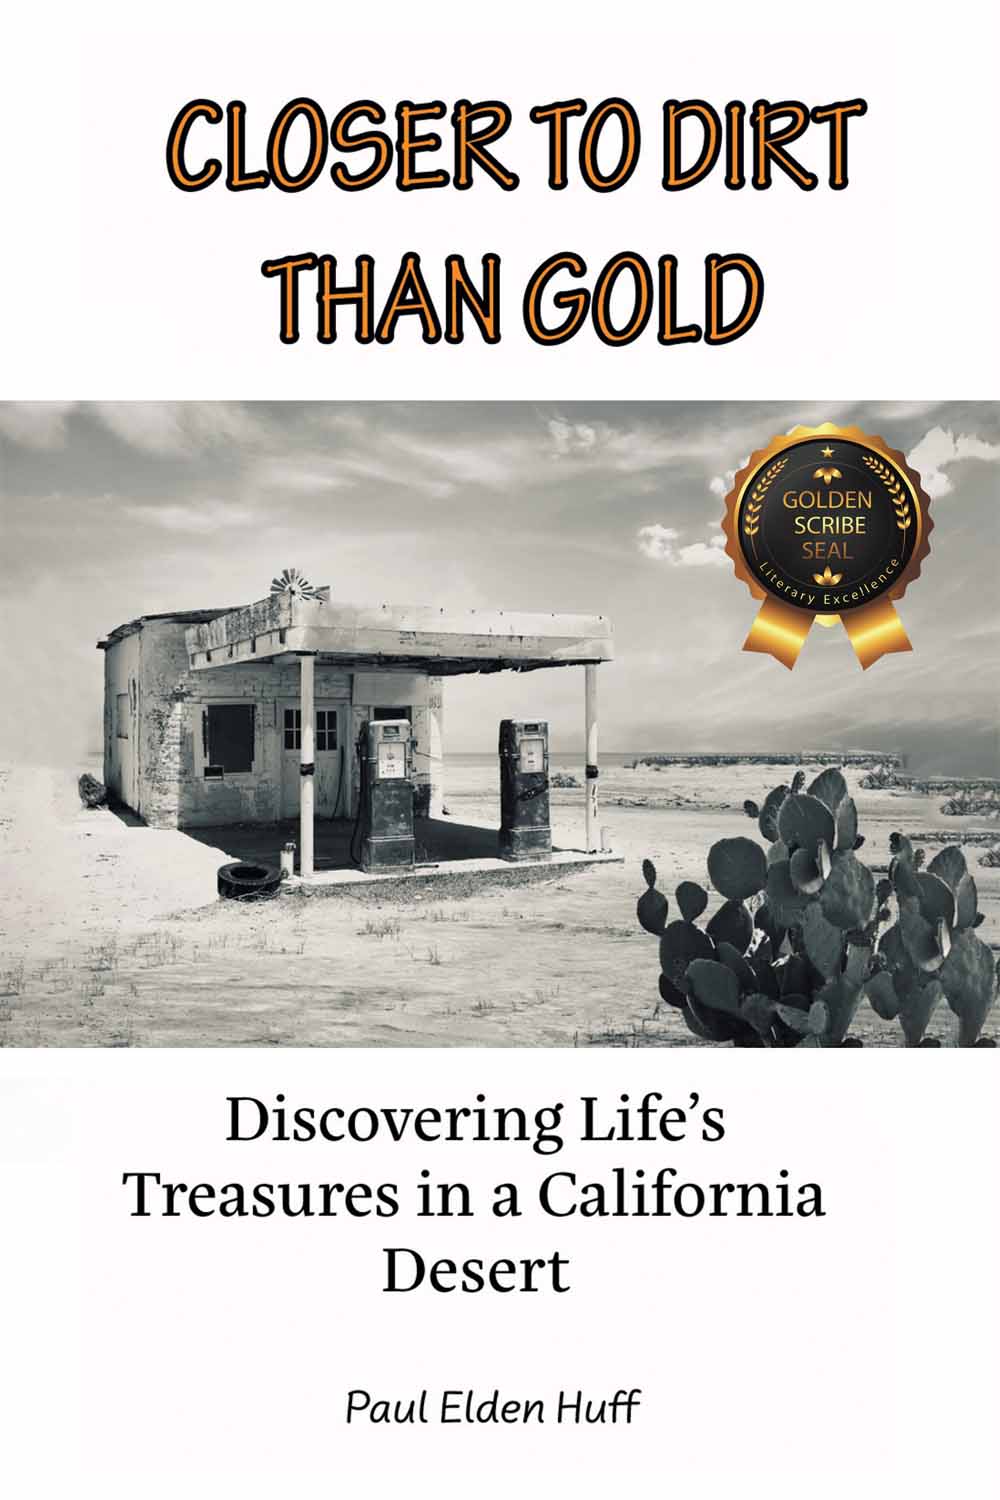 Closer To Dirt Than Gold: Discovering Life's Treasures in a California Desert